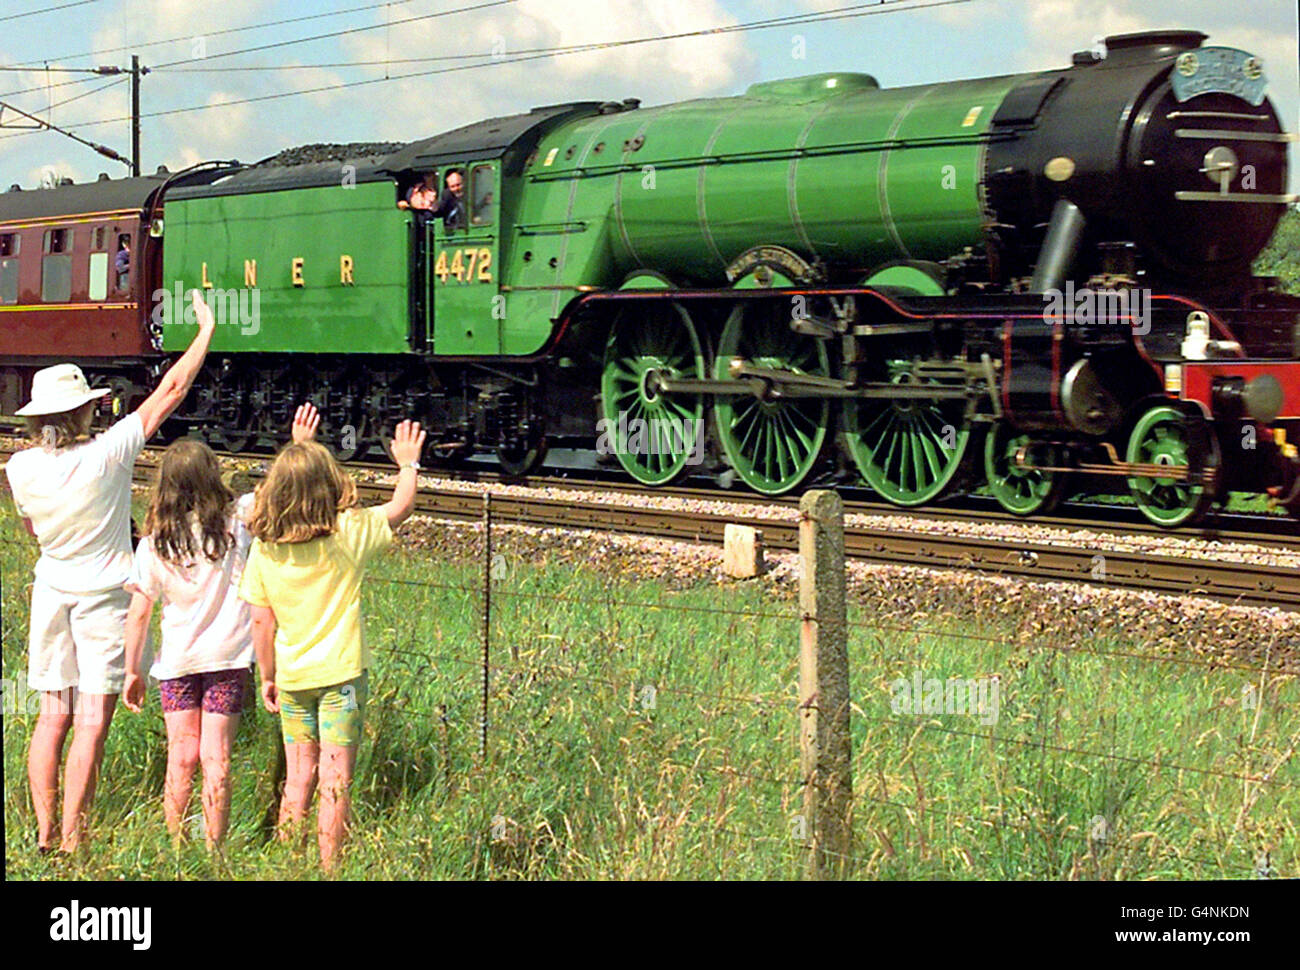 Railway children wave as the crowds turn out between York and London to watch The Flying Scotsman speed along the East Coast Main Railway Line, returning from a week on display at the National Railway Museum in York. * 1/3/02: More than 1,000 train enthusiasts have bought a stake in the world famous locomotive, it emerged. Flying Scotsman plc has raised 850,000 through a share placing ahead of its flotation on the stock market next month. The placing closed last night and the amount of cash raised means the company now has an extra 1.95 million at its disposal. Stock Photo